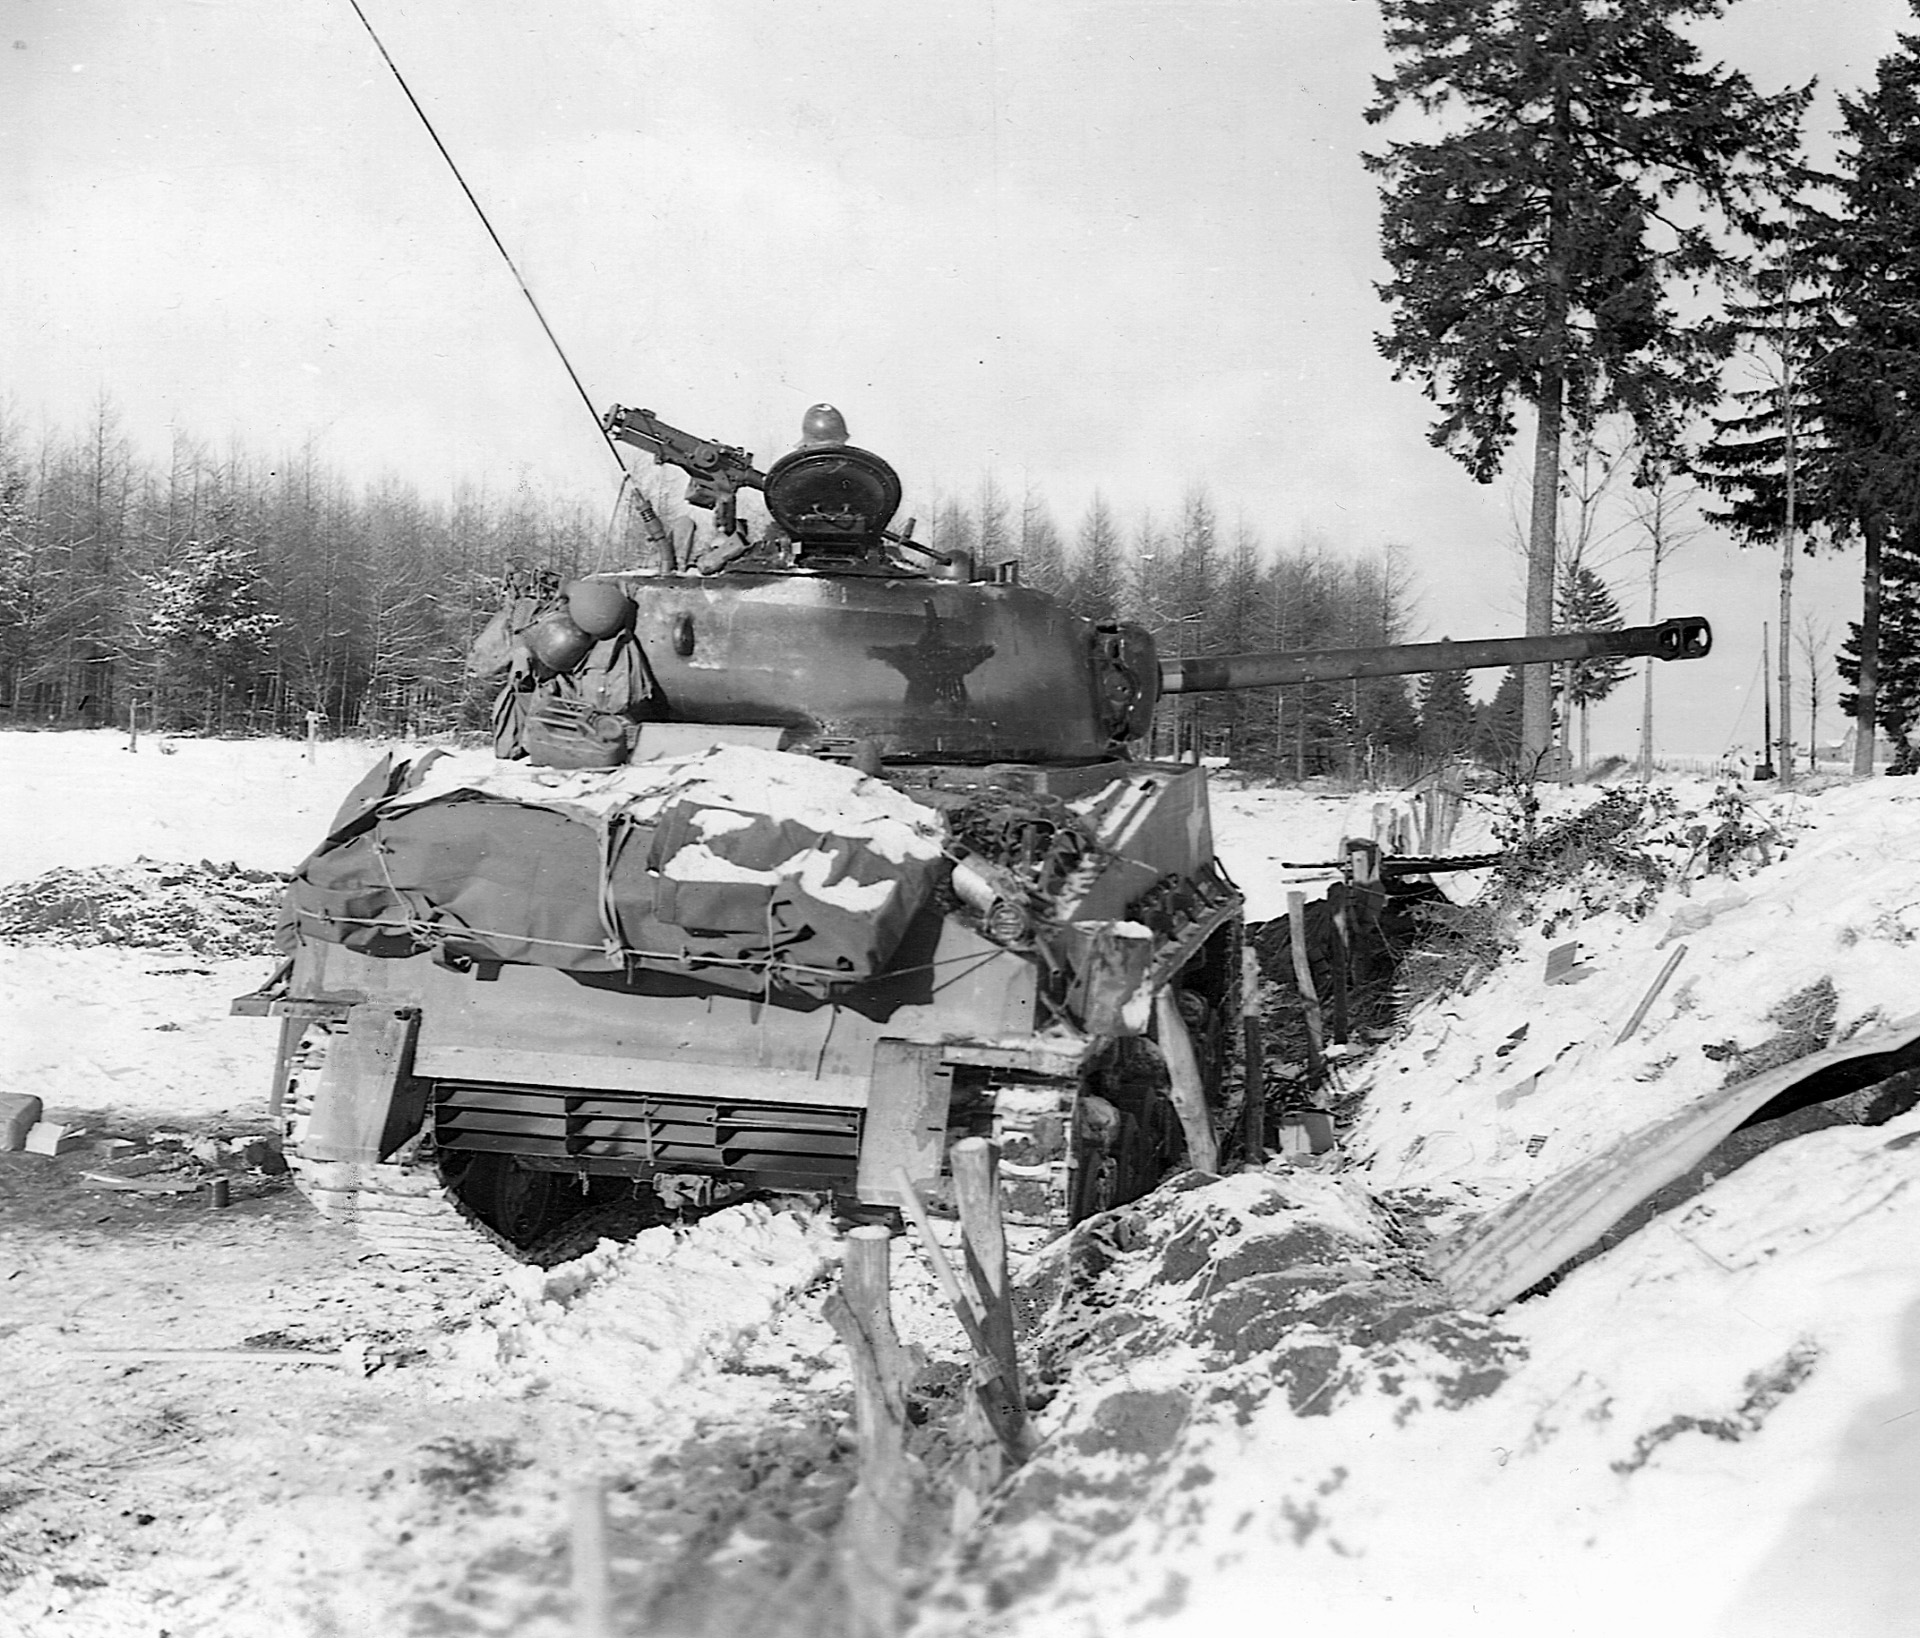  An M4 Sherman medium tank of the U.S. 4th Armored Division plows toward besieged Bastogne during the Battle of the Bulge in December 1944. The white star on the turret has been darkened to make it less visible to German troops.